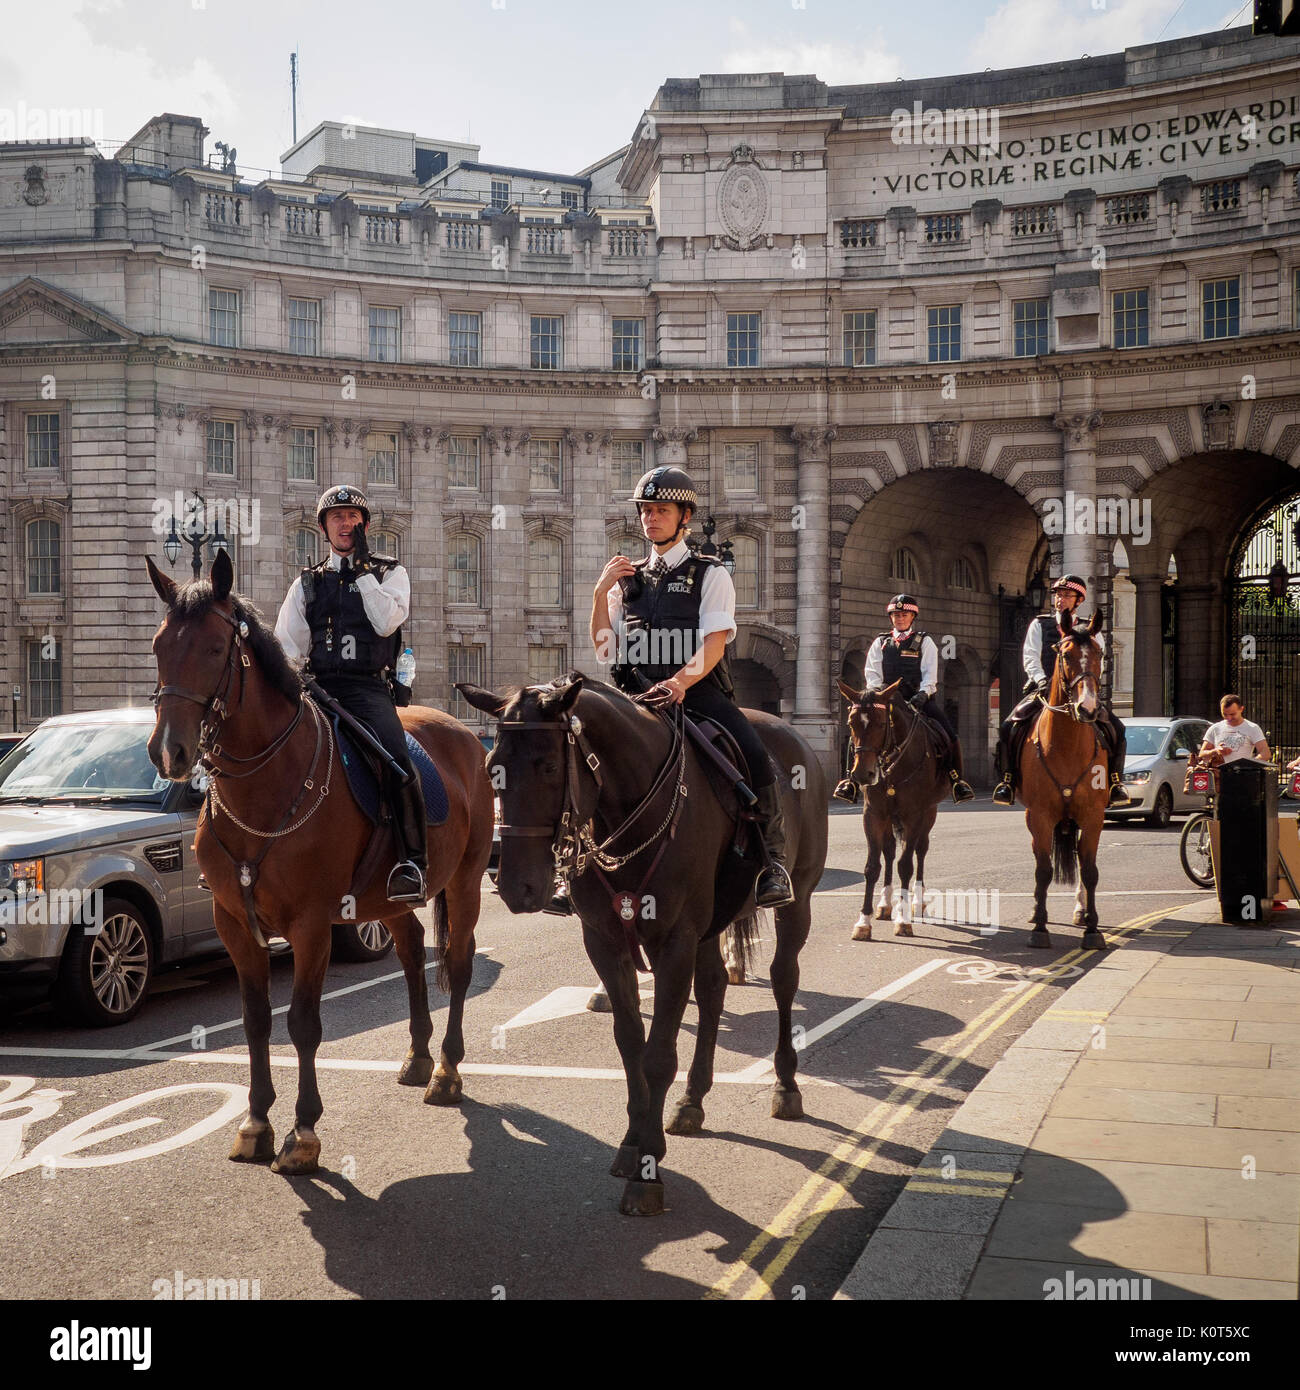 Mounted police patrolling the Mall in London (UK). July 2017. Square format. Stock Photo